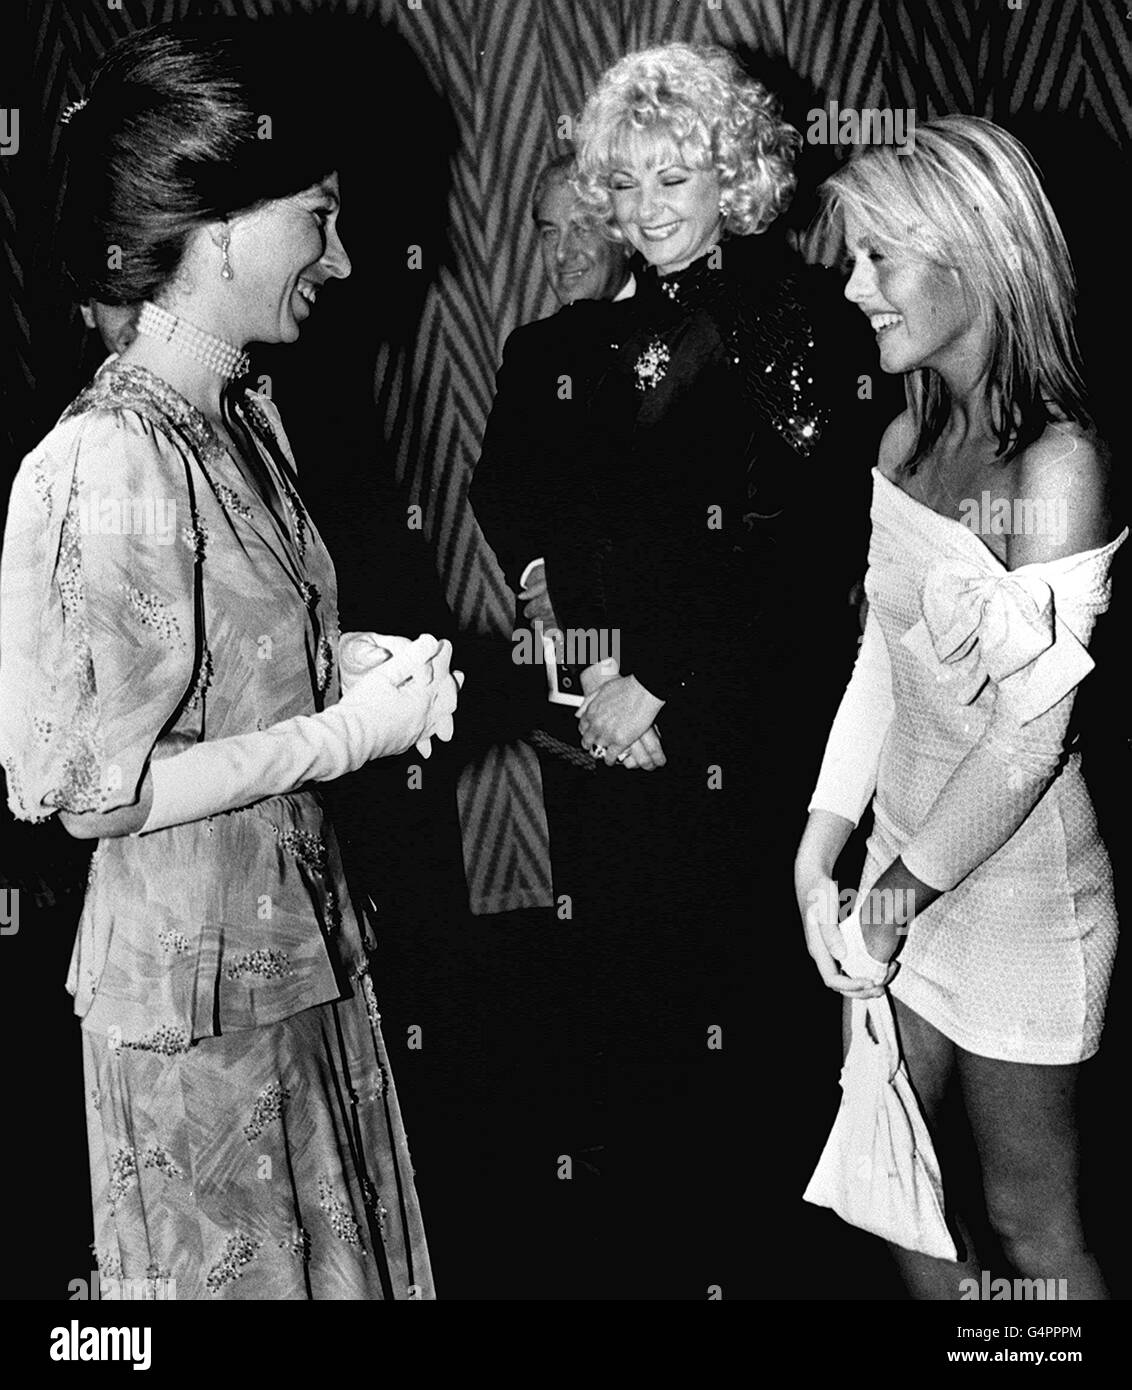 The Princess Royal greets young actress Patsy Kensit star of the film 'Absolute Beginners' at the Royal premiere held at Leicester Square in London Stock Photo